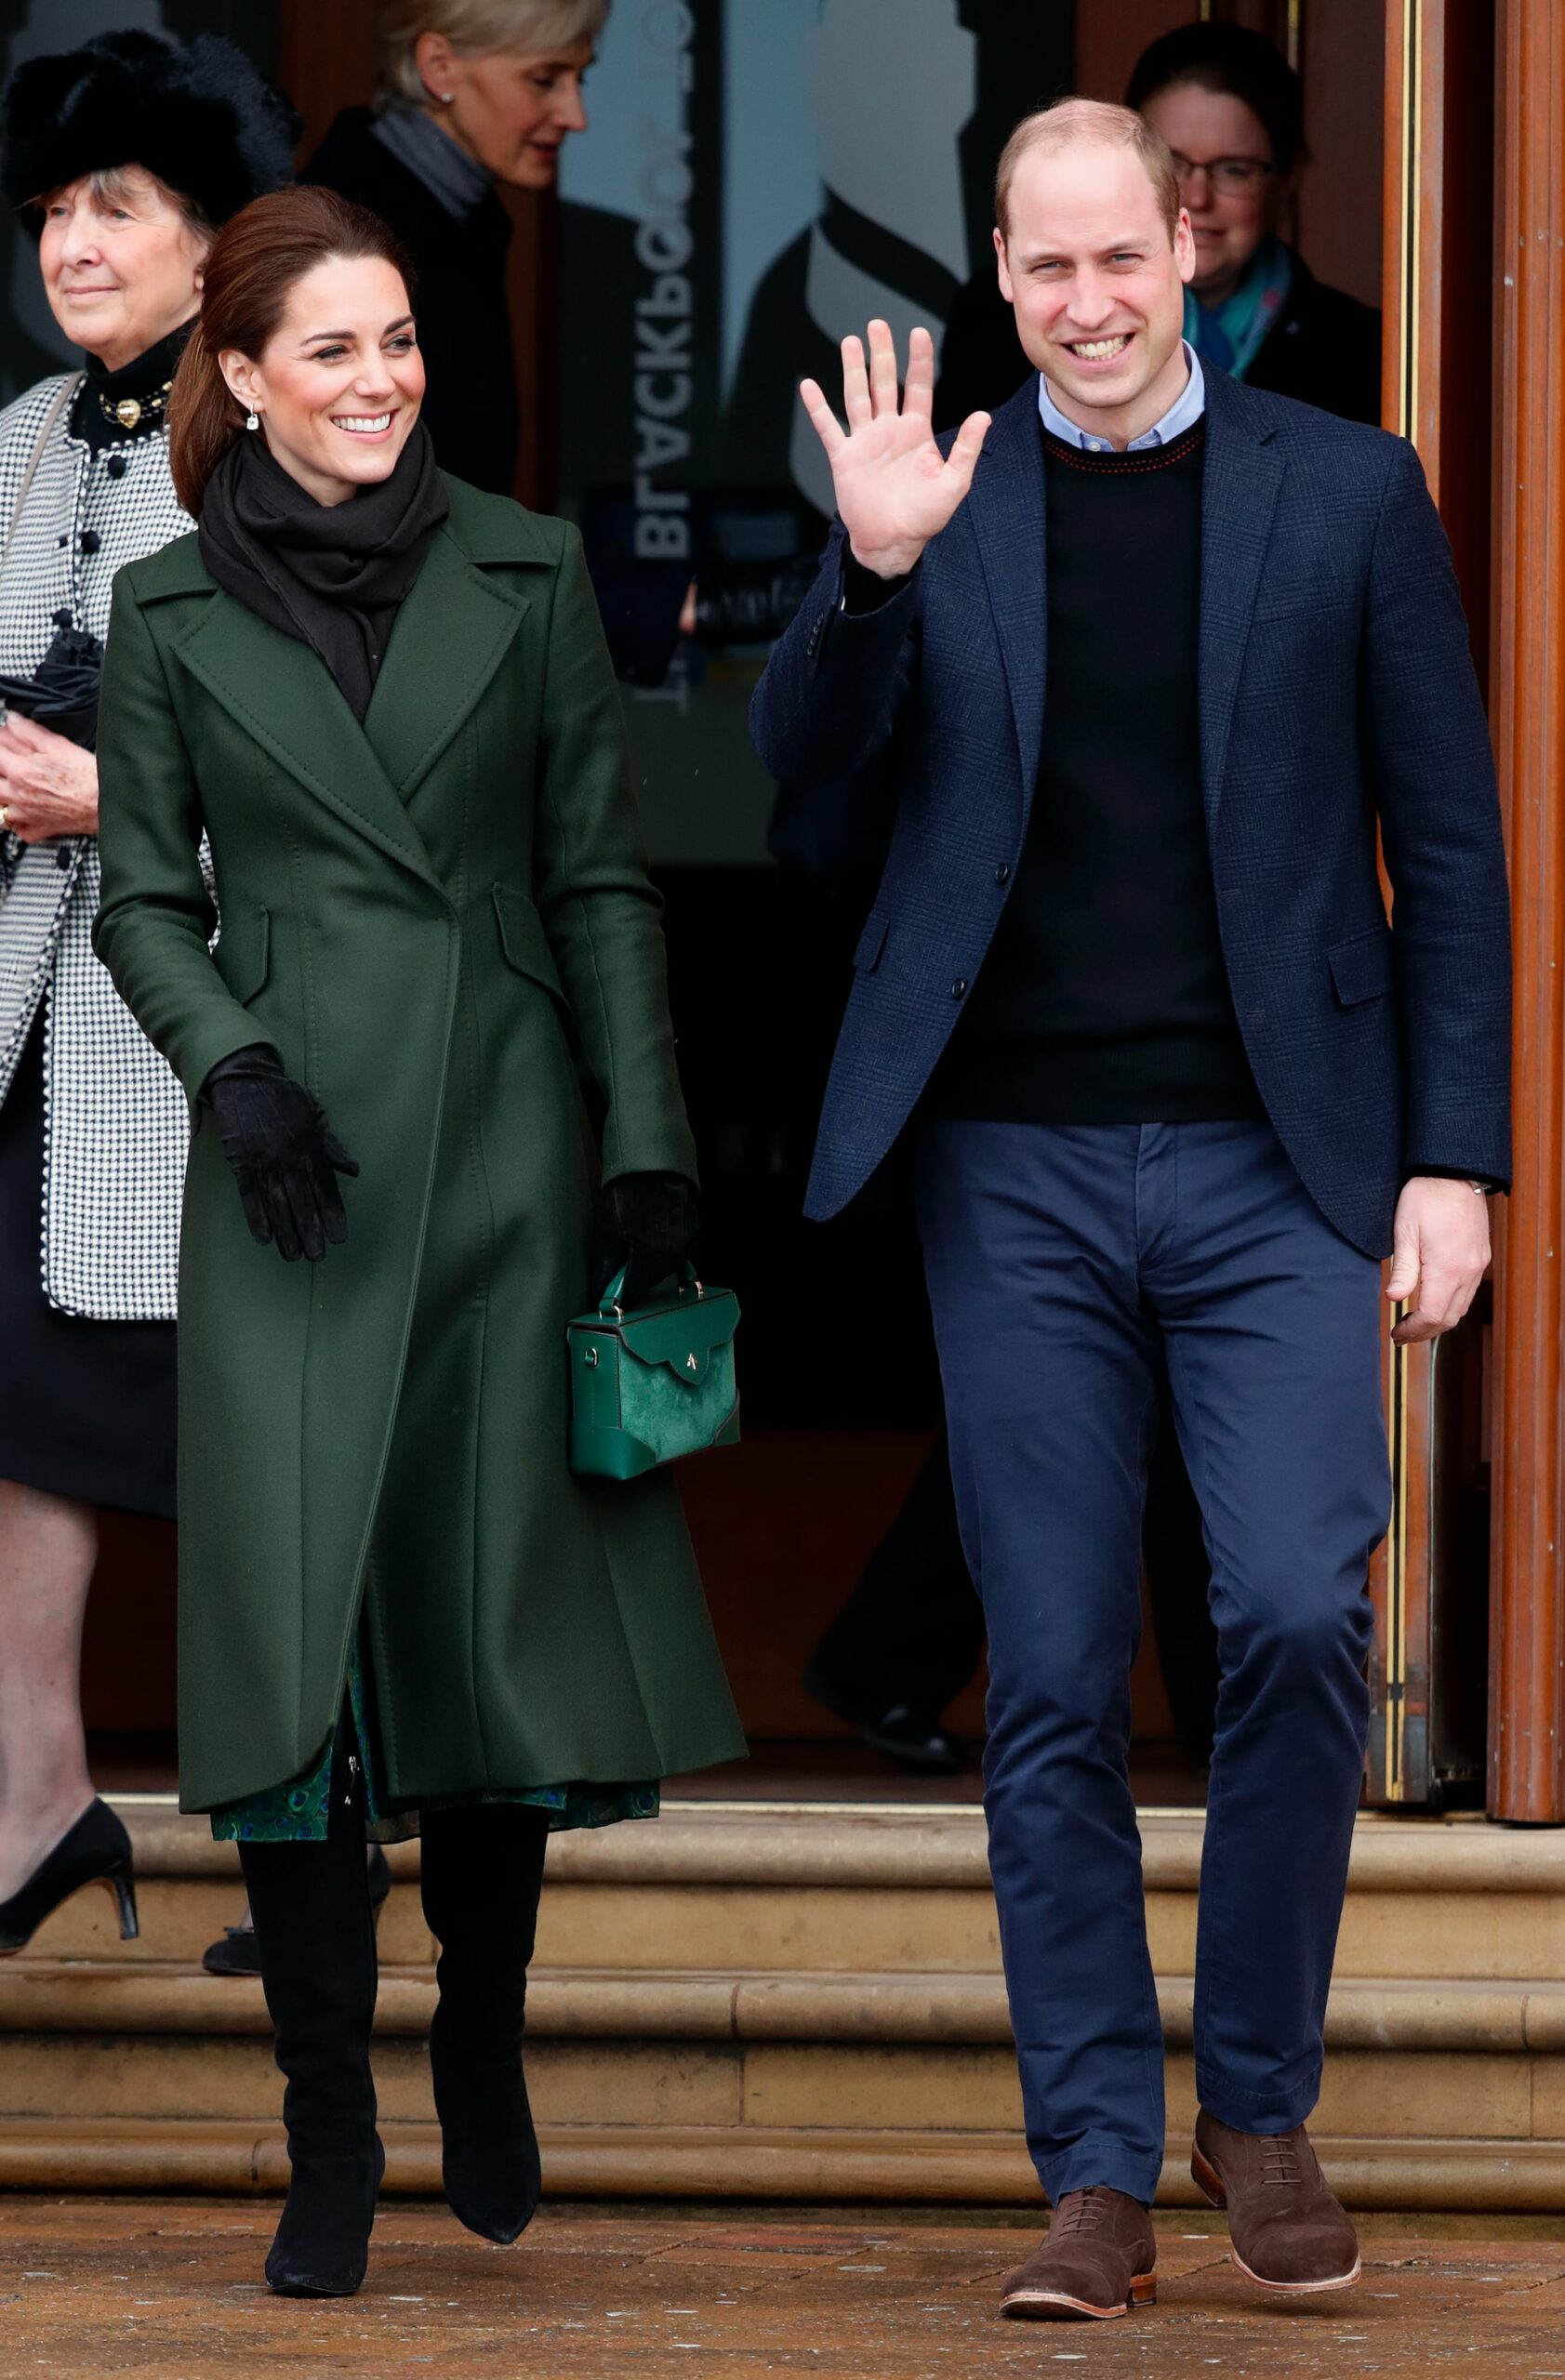 BLACKPOOL, UNITED KINGDOM - MARCH 06: (EMBARGOED FOR PUBLICATION IN UK NEWSPAPERS UNTIL 24 HOURS AFTER CREATE DATE AND TIME) Catherine, Duchess of Cambridge and Prince William, Duke of Cambridge visit Blackpool Tower and greet members of the public on the Comedy Carpet on March 6, 2019 in Blackpool, England. (Photo by Max Mumby/Indigo/Getty Images)